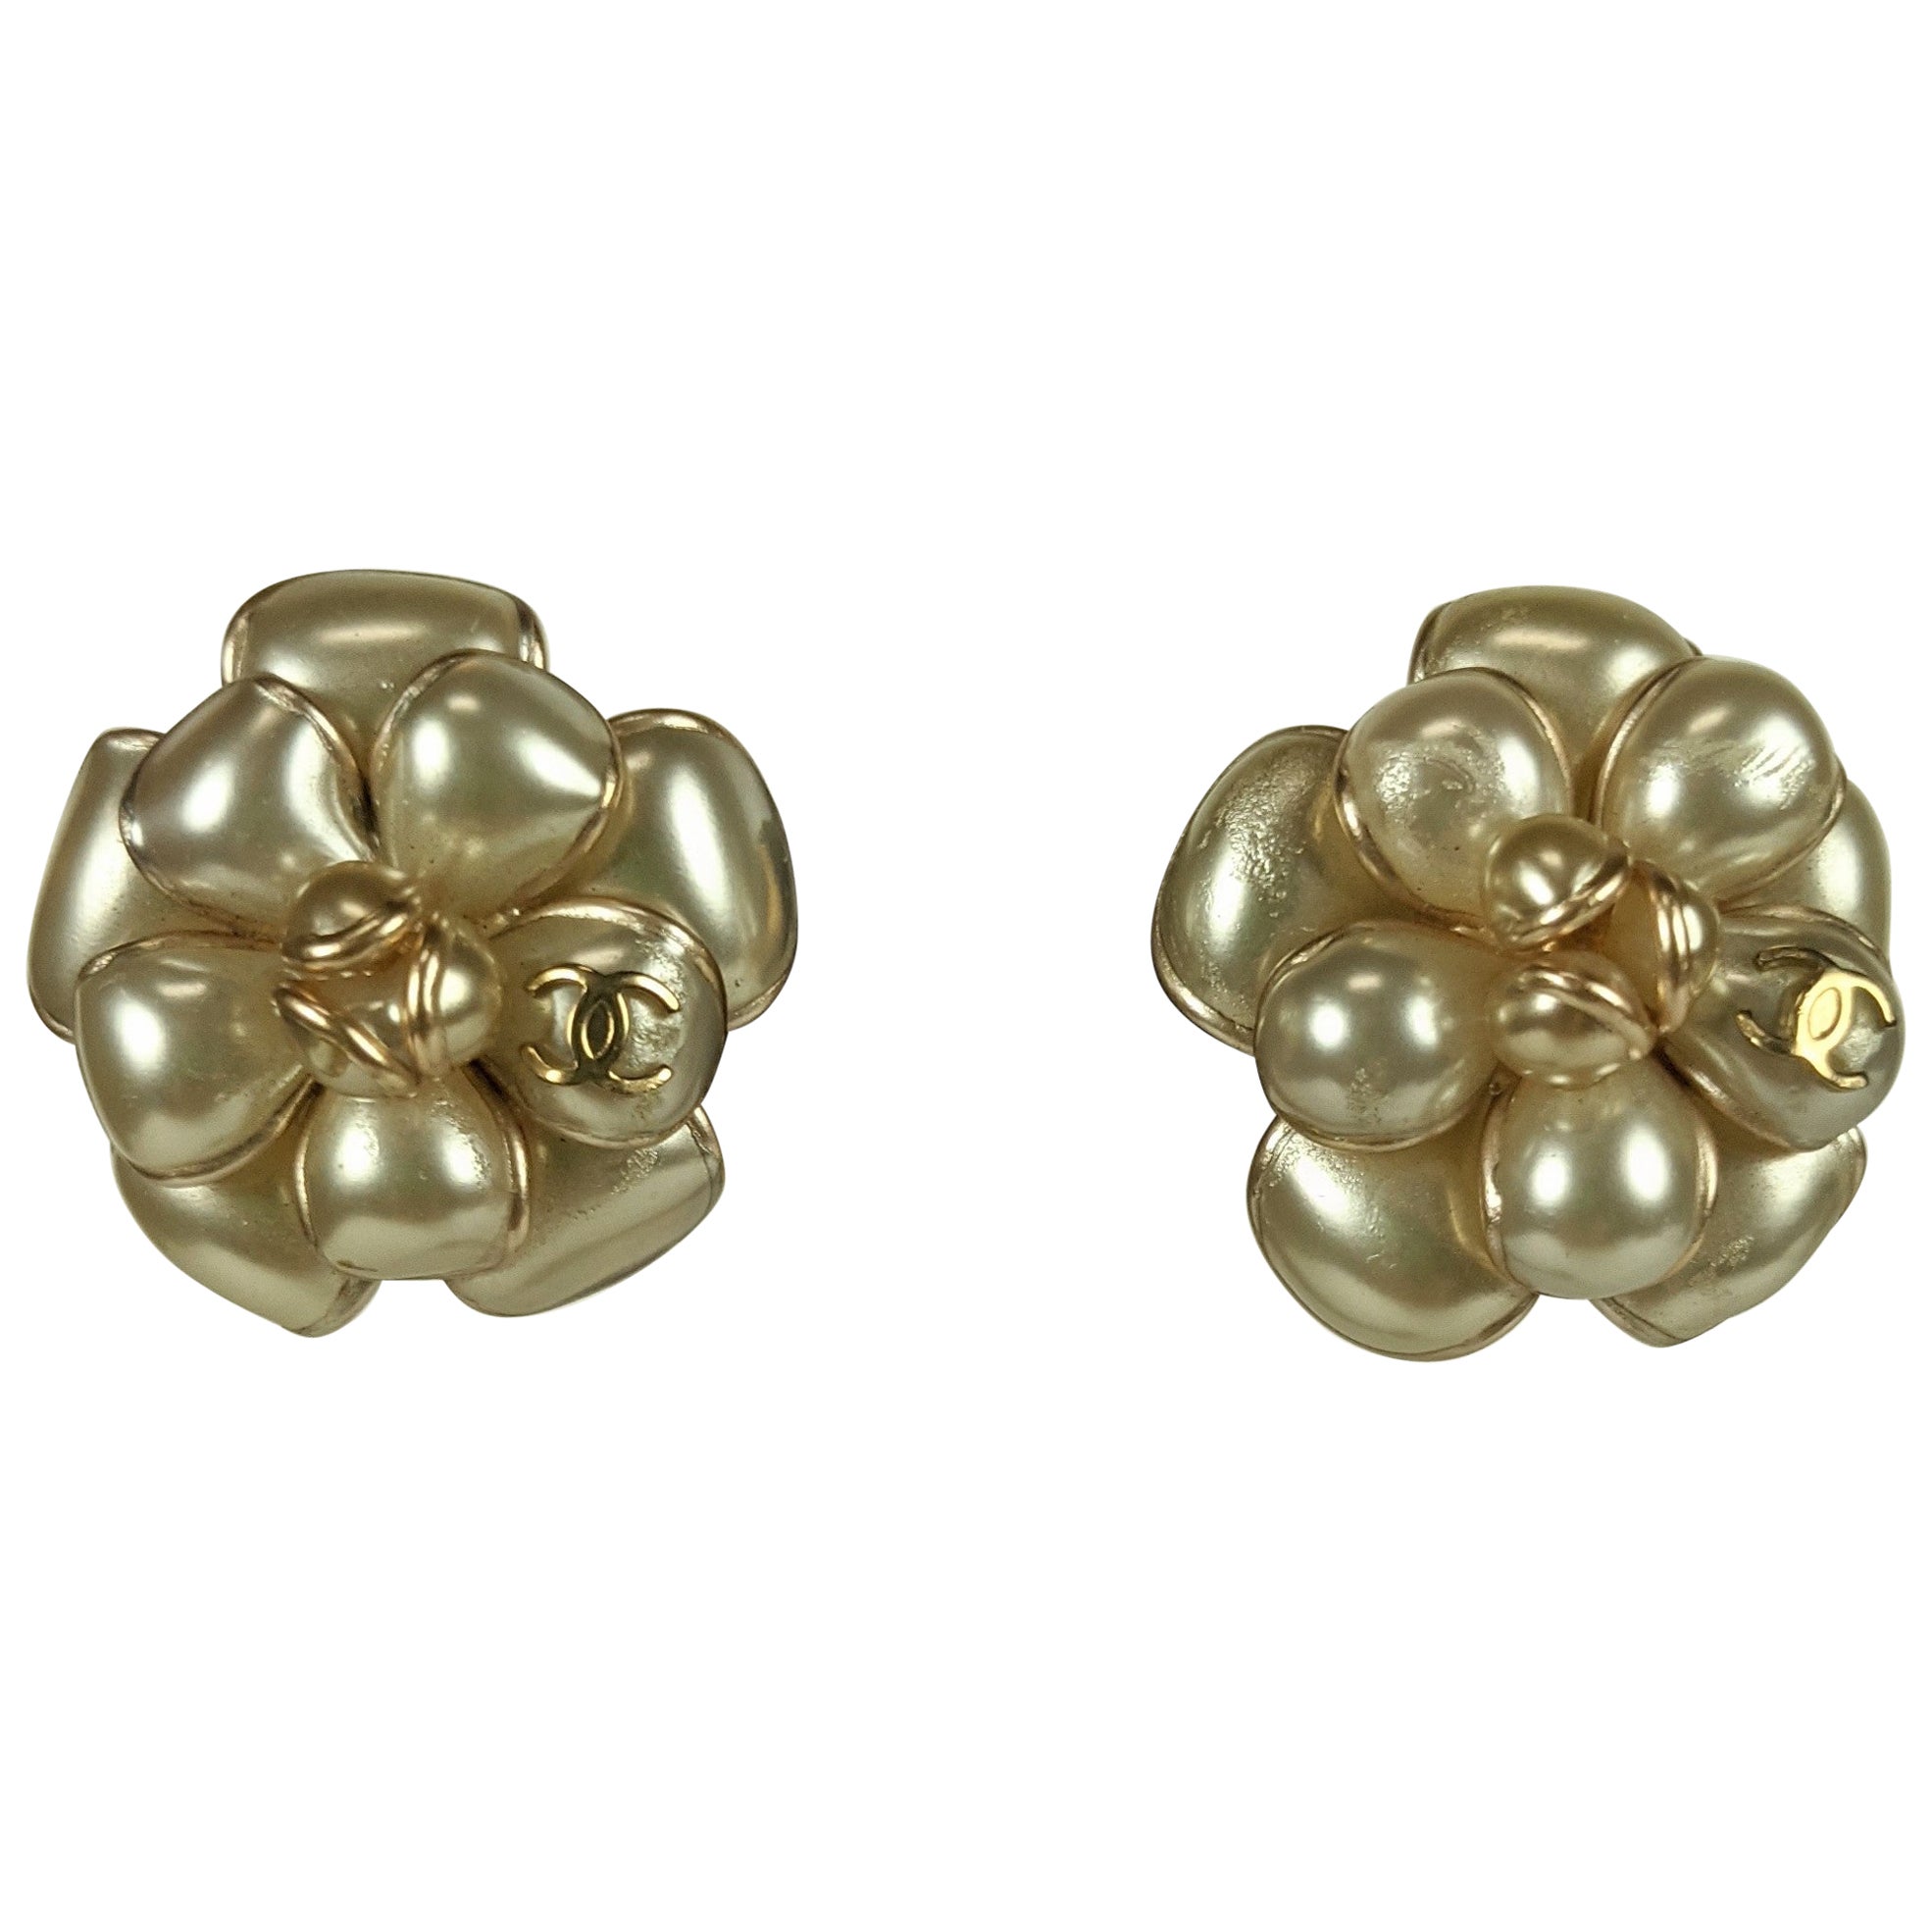 Chanel Pearlized Poured Glass Camellia Earrings